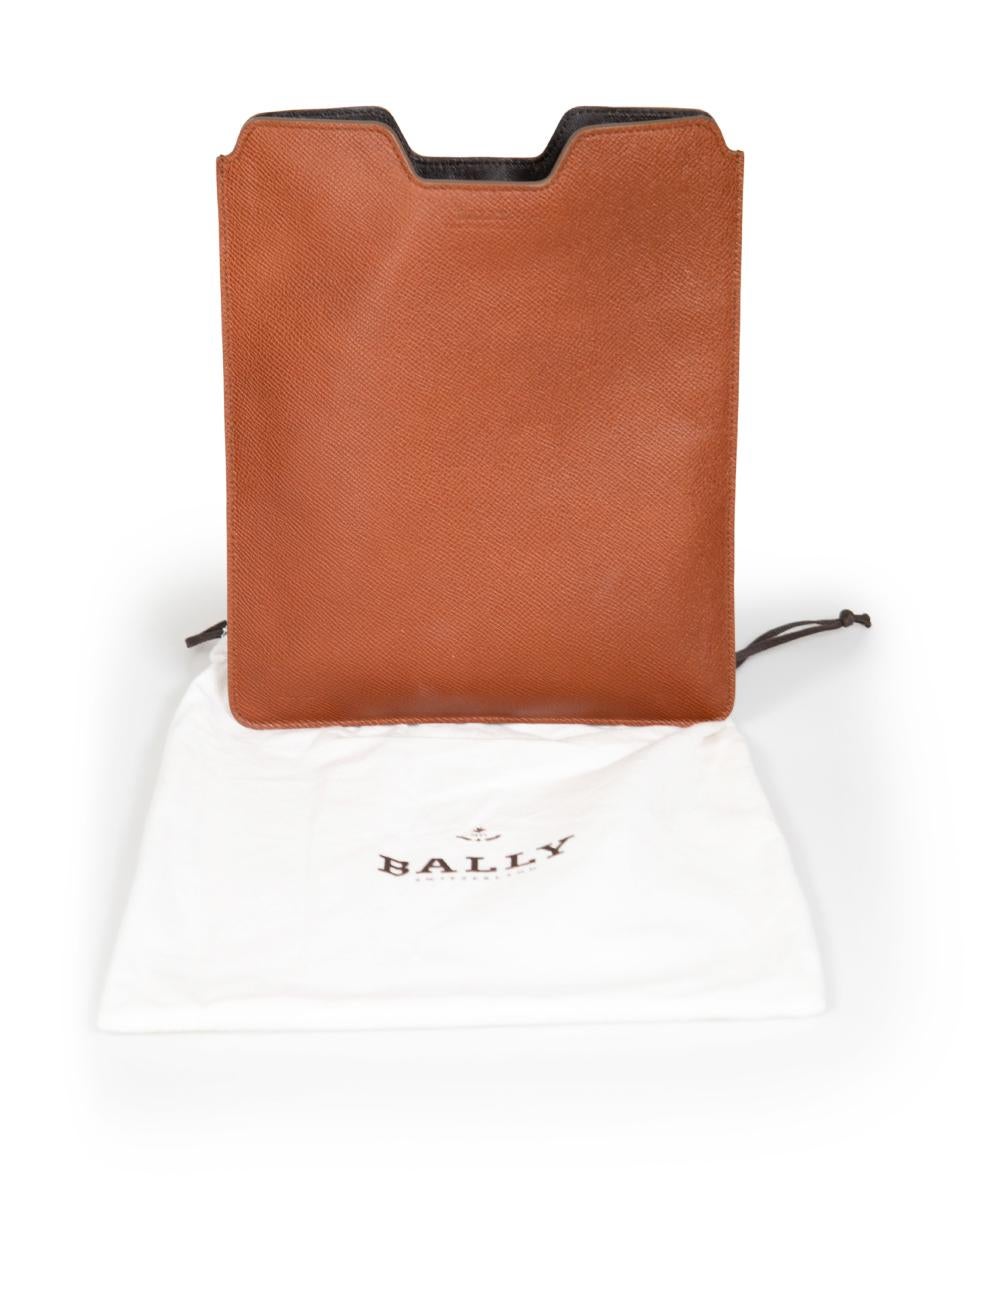 Bally Brown Grained Leather iPad Cover For Sale 3